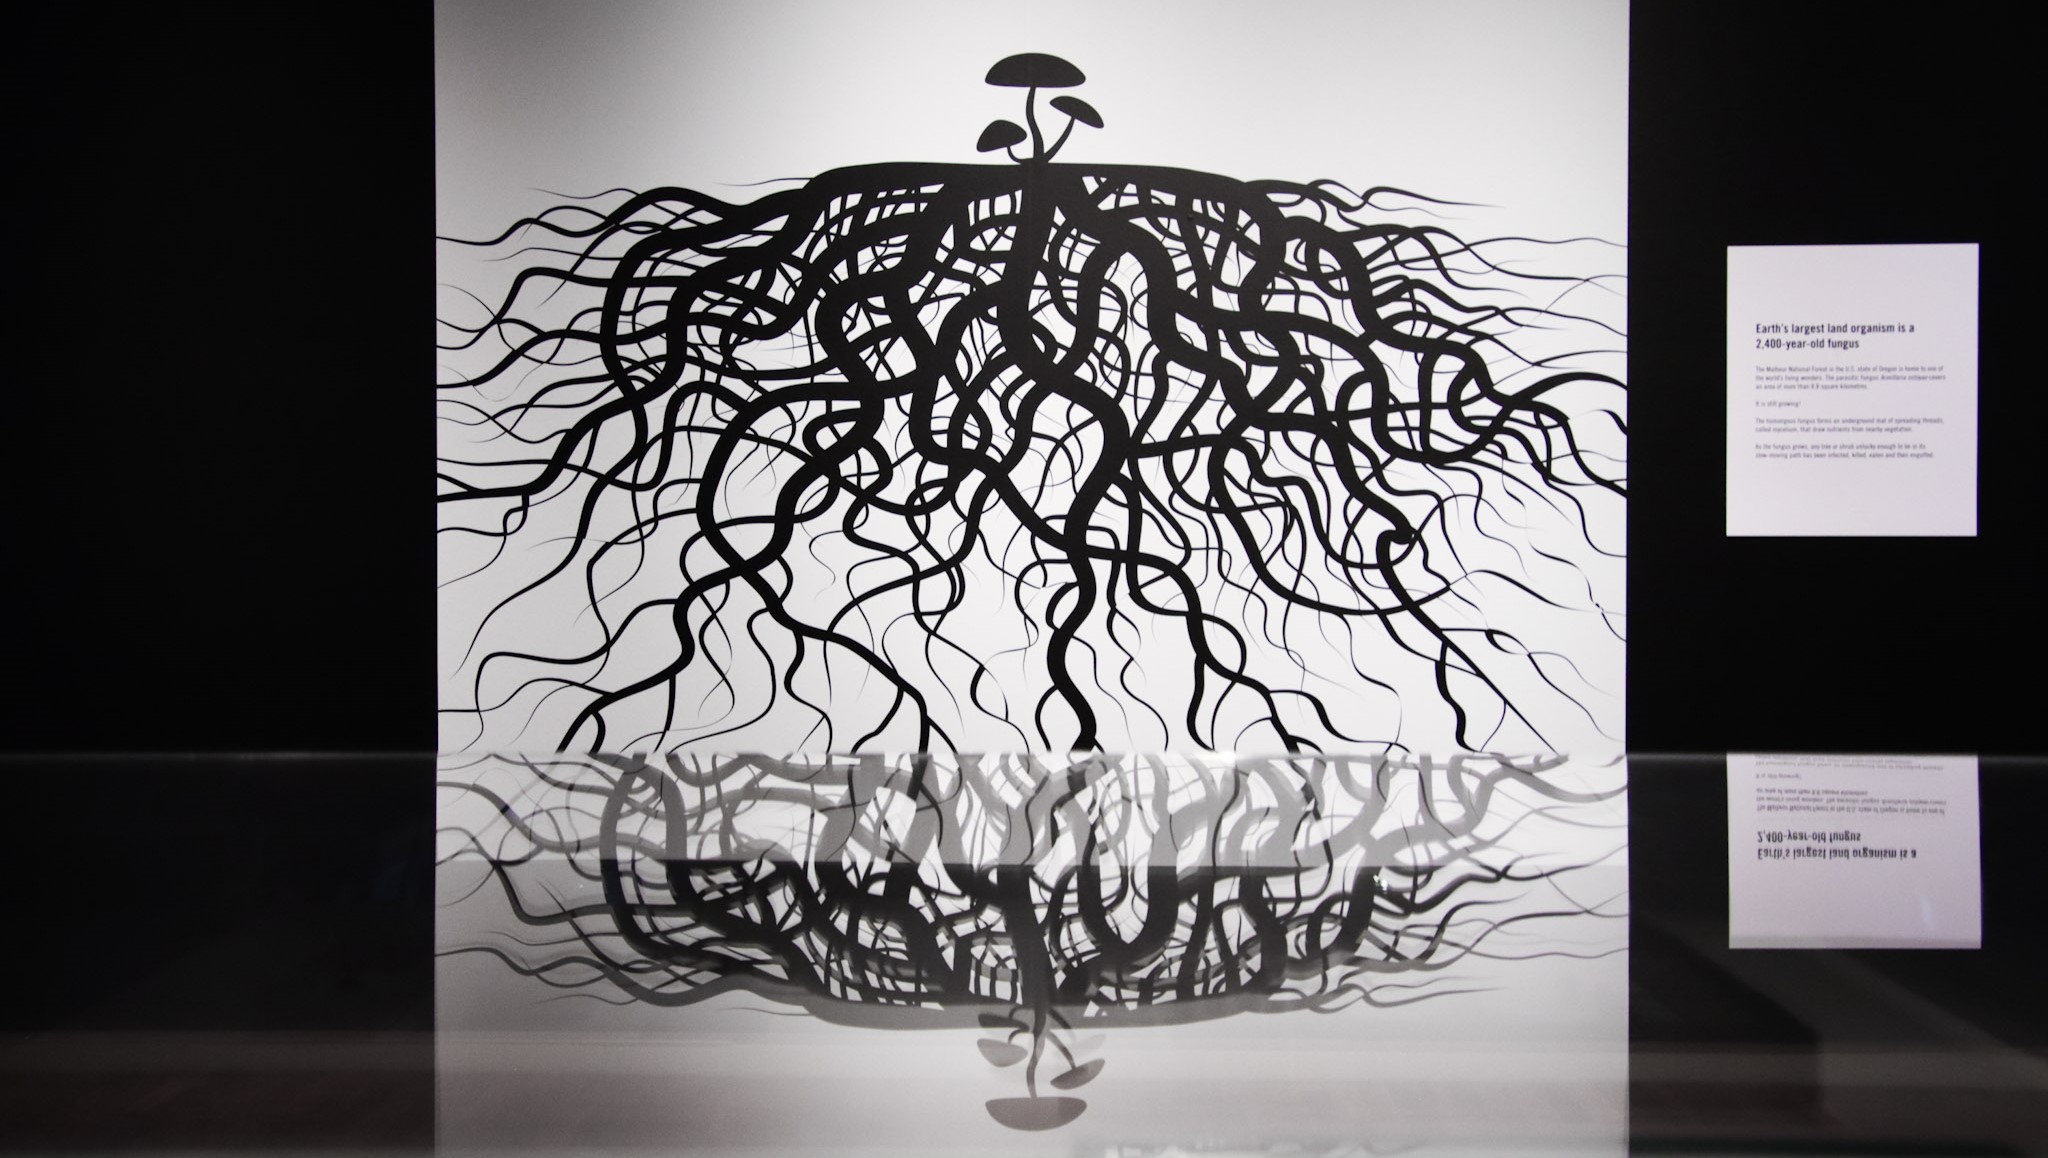 Black and white exhibition image of a mushroom with extended roots from the Mind Blown exhibition